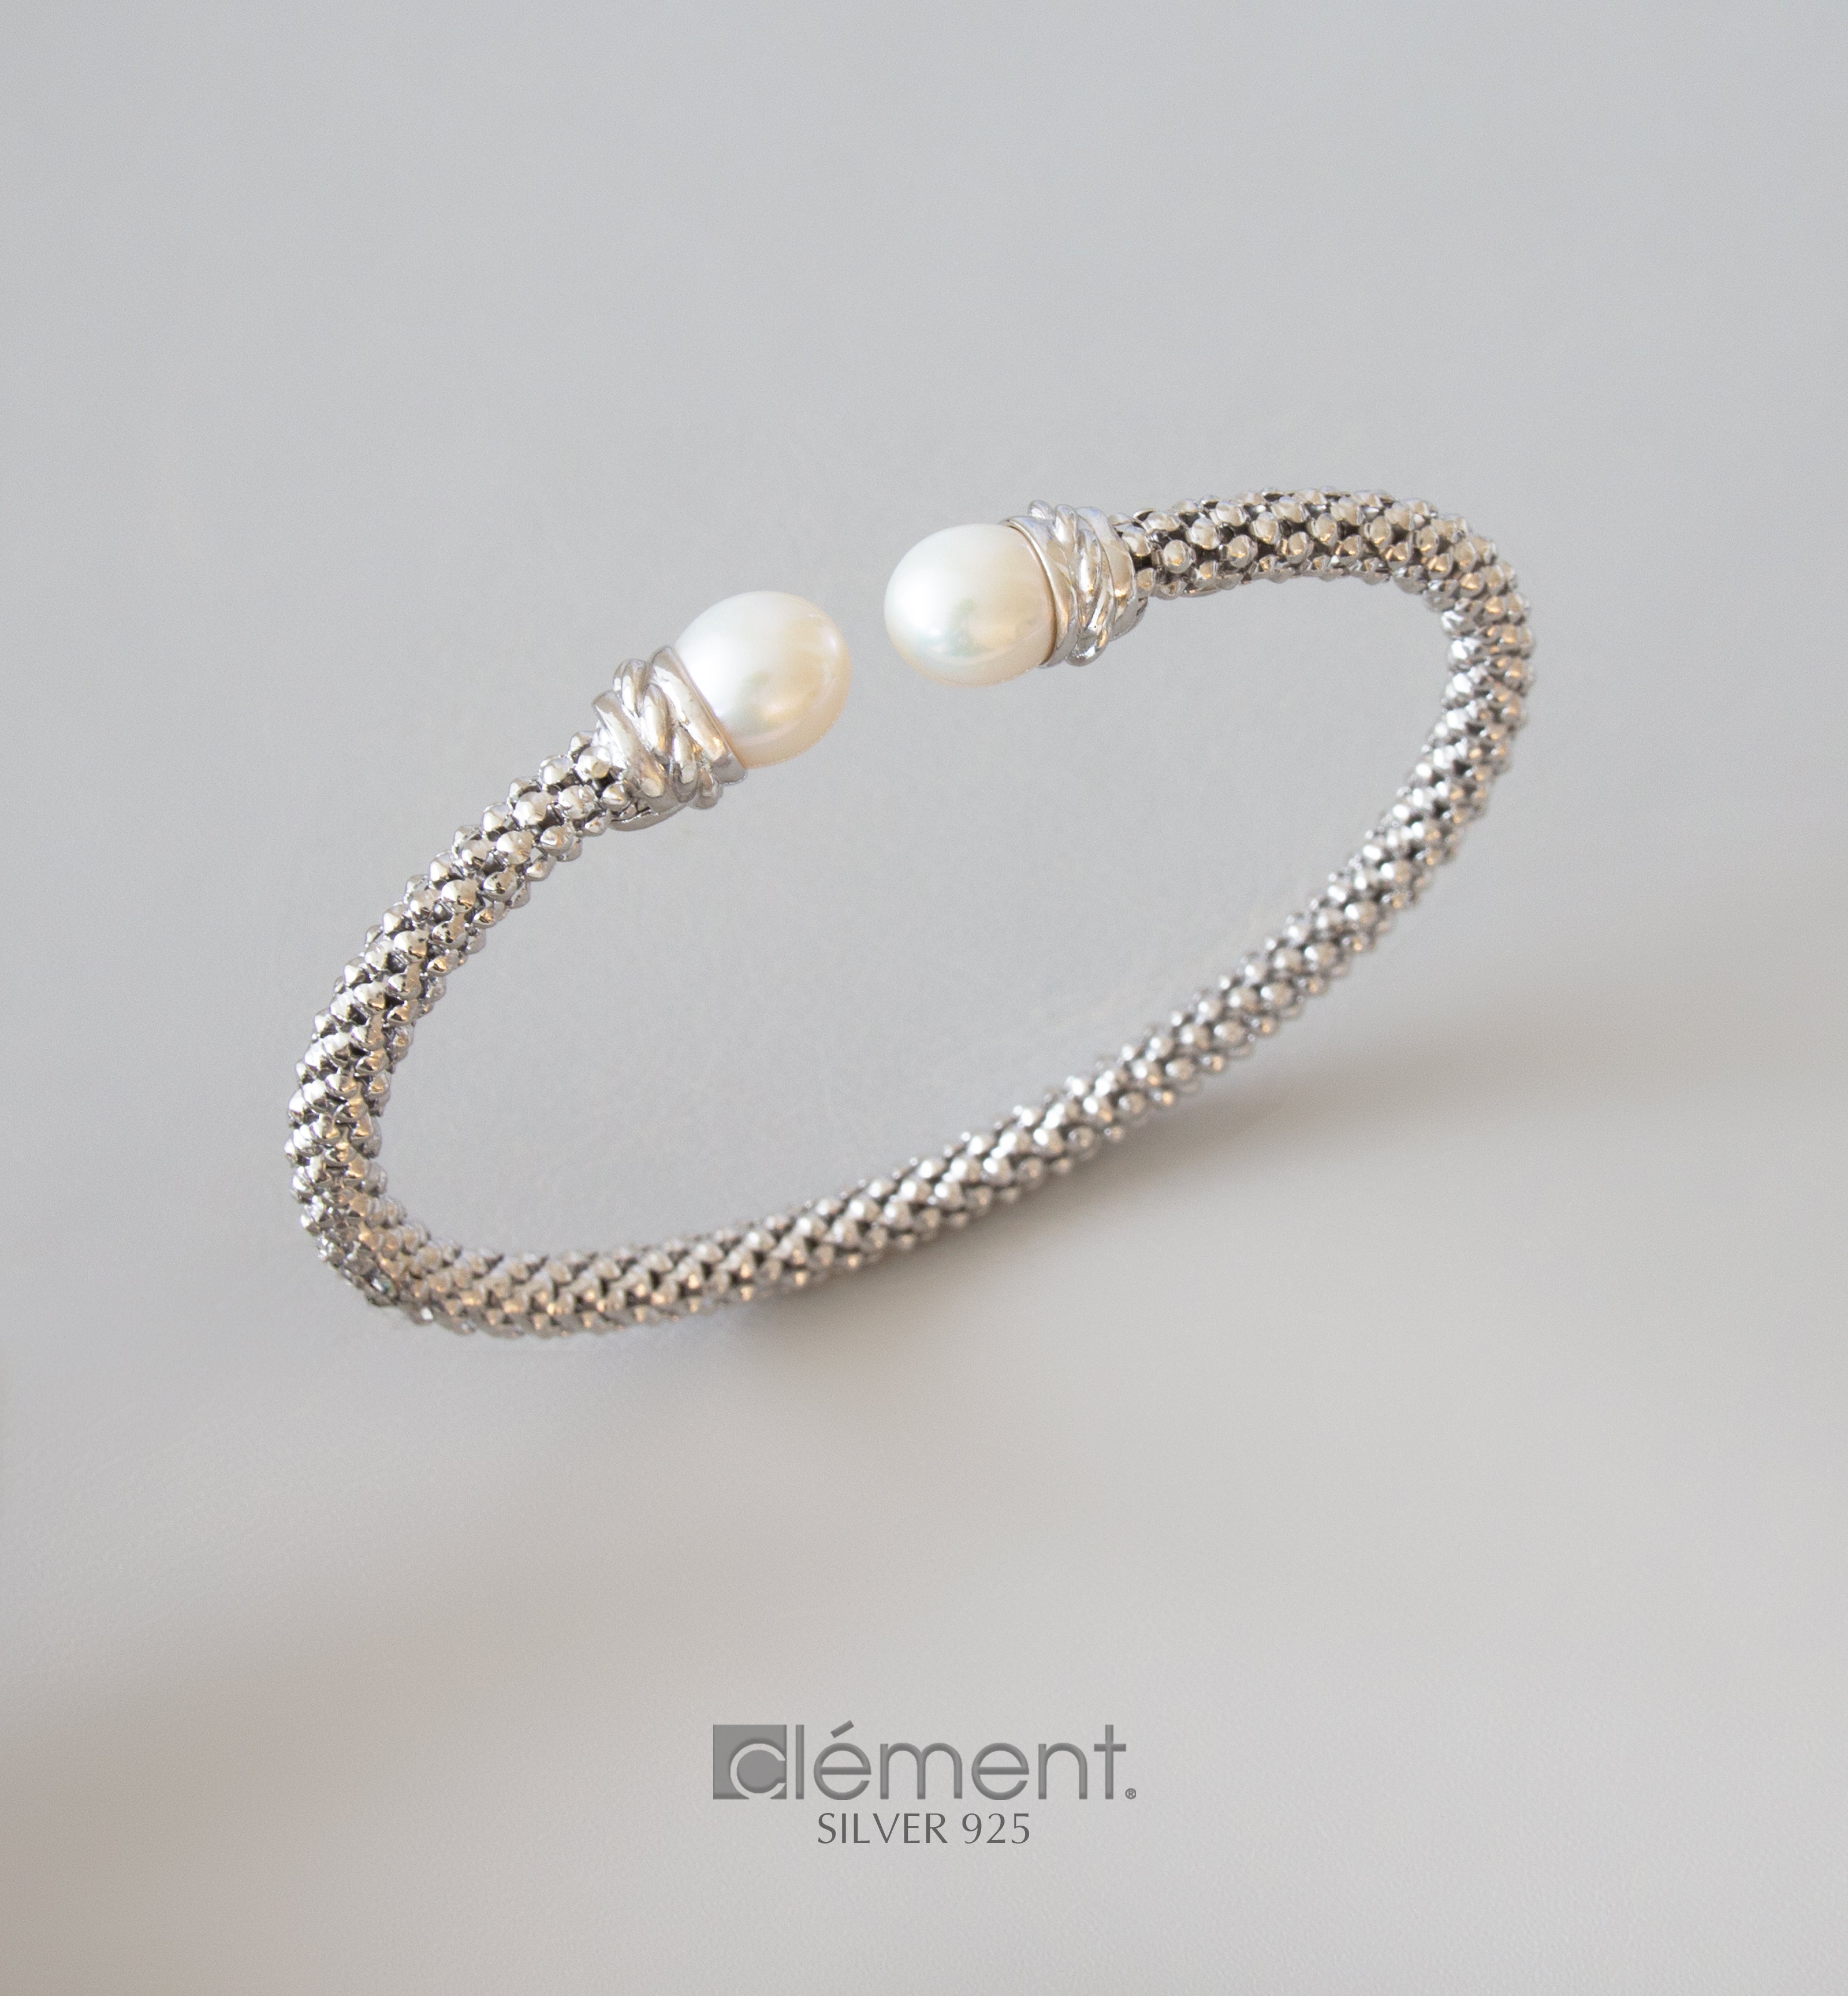 Silver 925 Bangle with Pearls